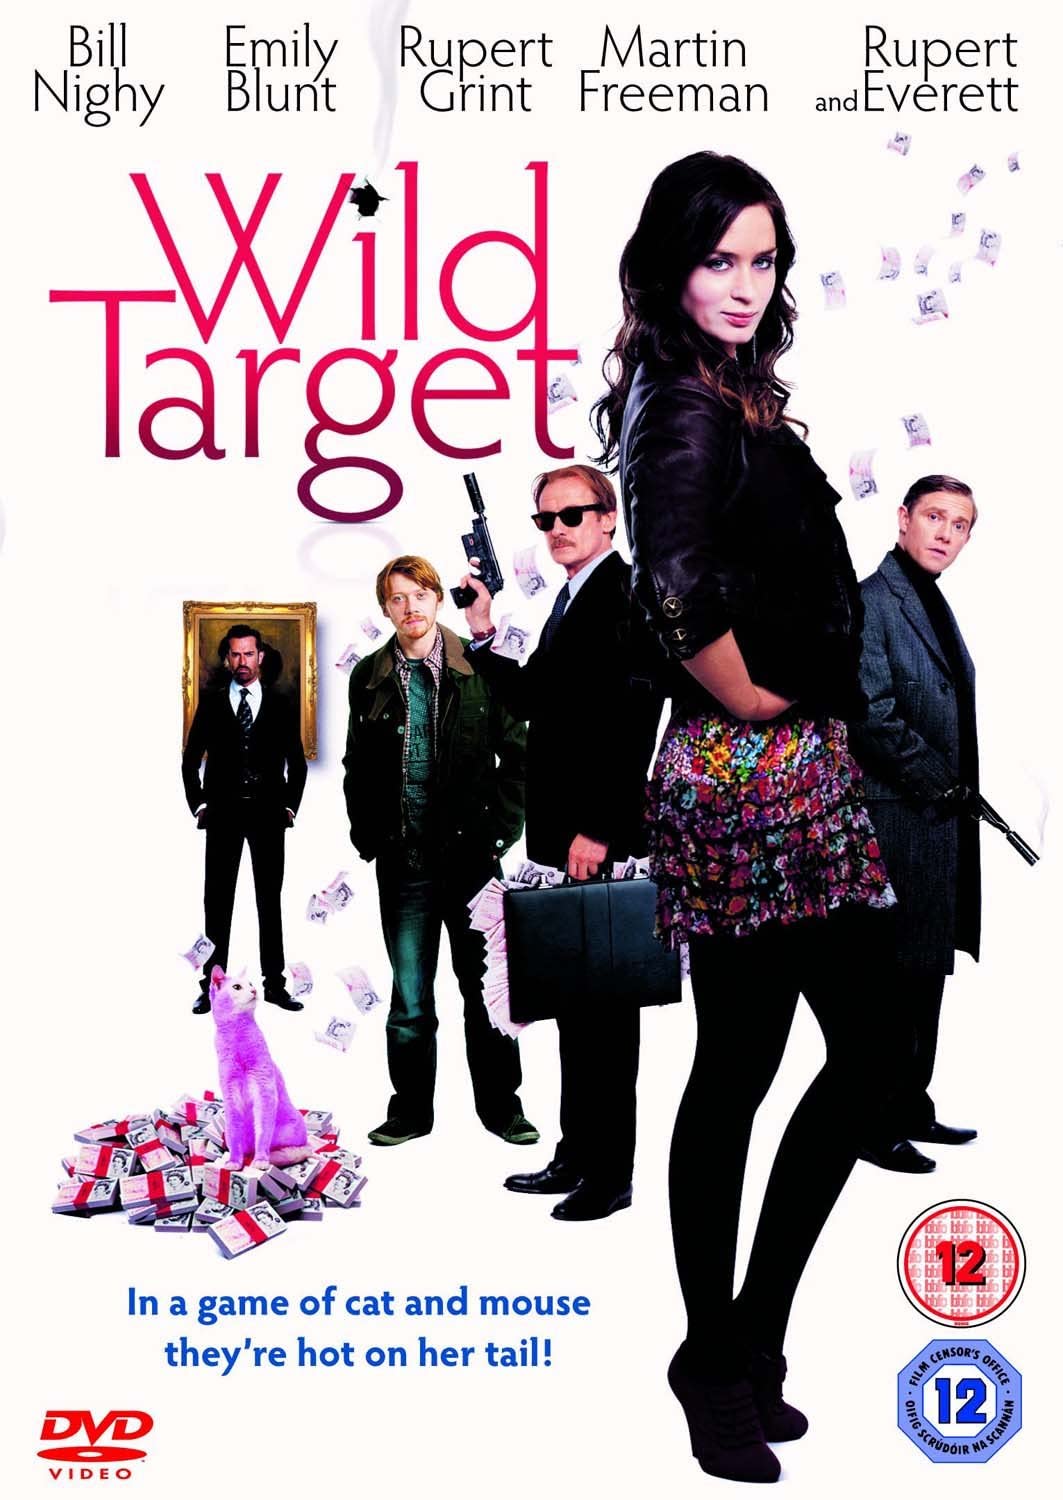 Wild Target - Action/Comedy [DVD]